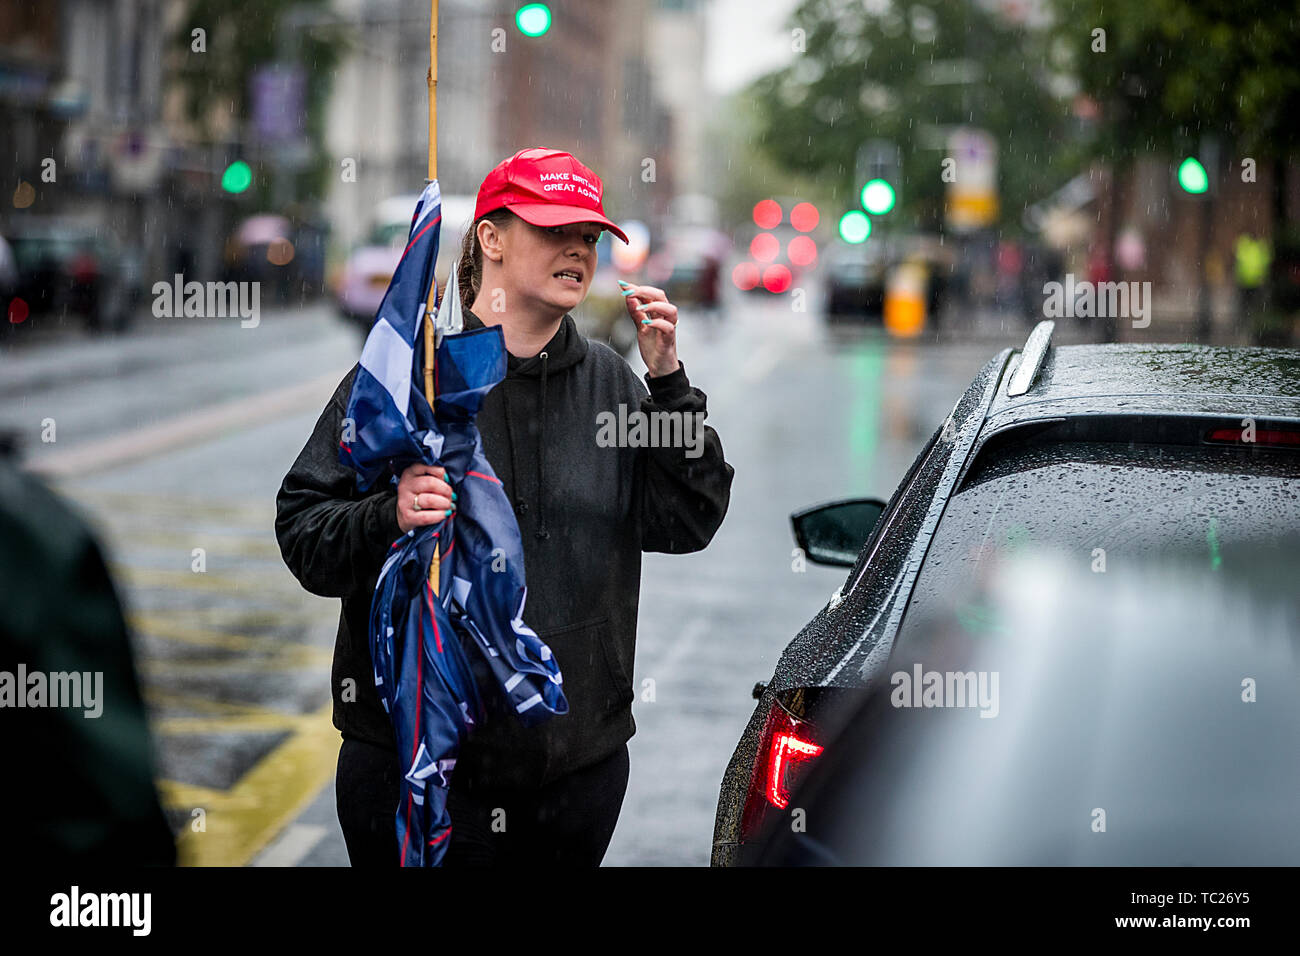 Former Belfast Councillor Jolene Bunting during a corner protest at a 'Stop Trumpism' rally hosted by ExAct: Expat Action Group NI, at Belfast City Hall. Stock Photo